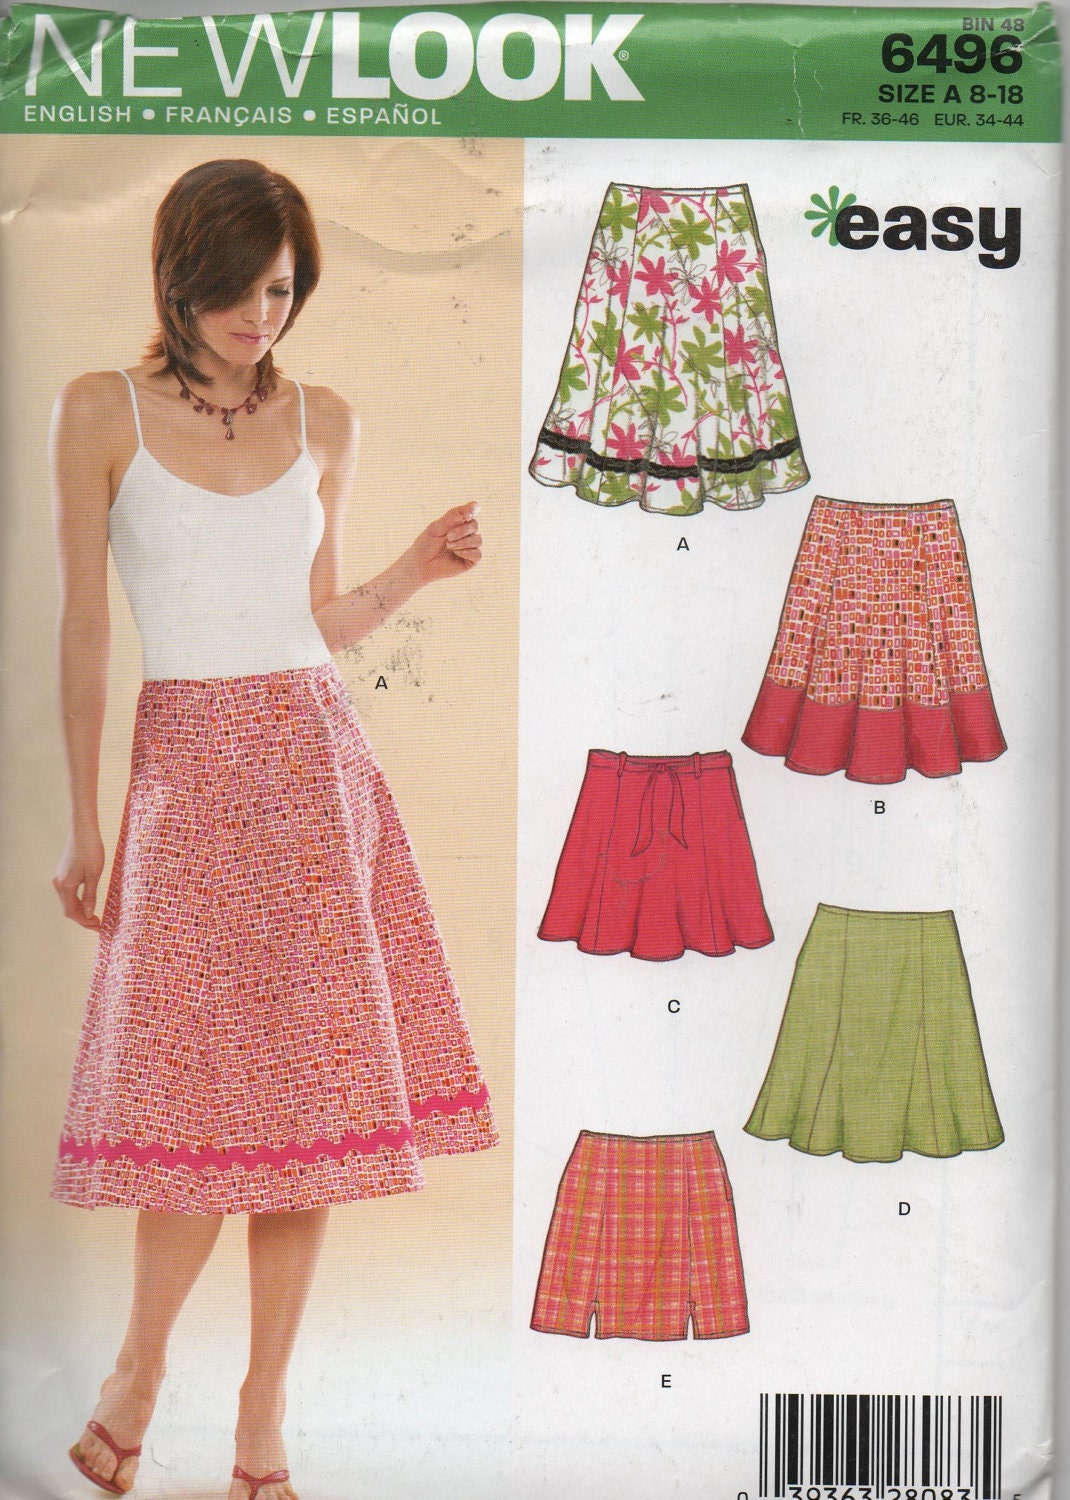 Easy Skirt Pattern New Look Sizes 8-18 English French Spanish